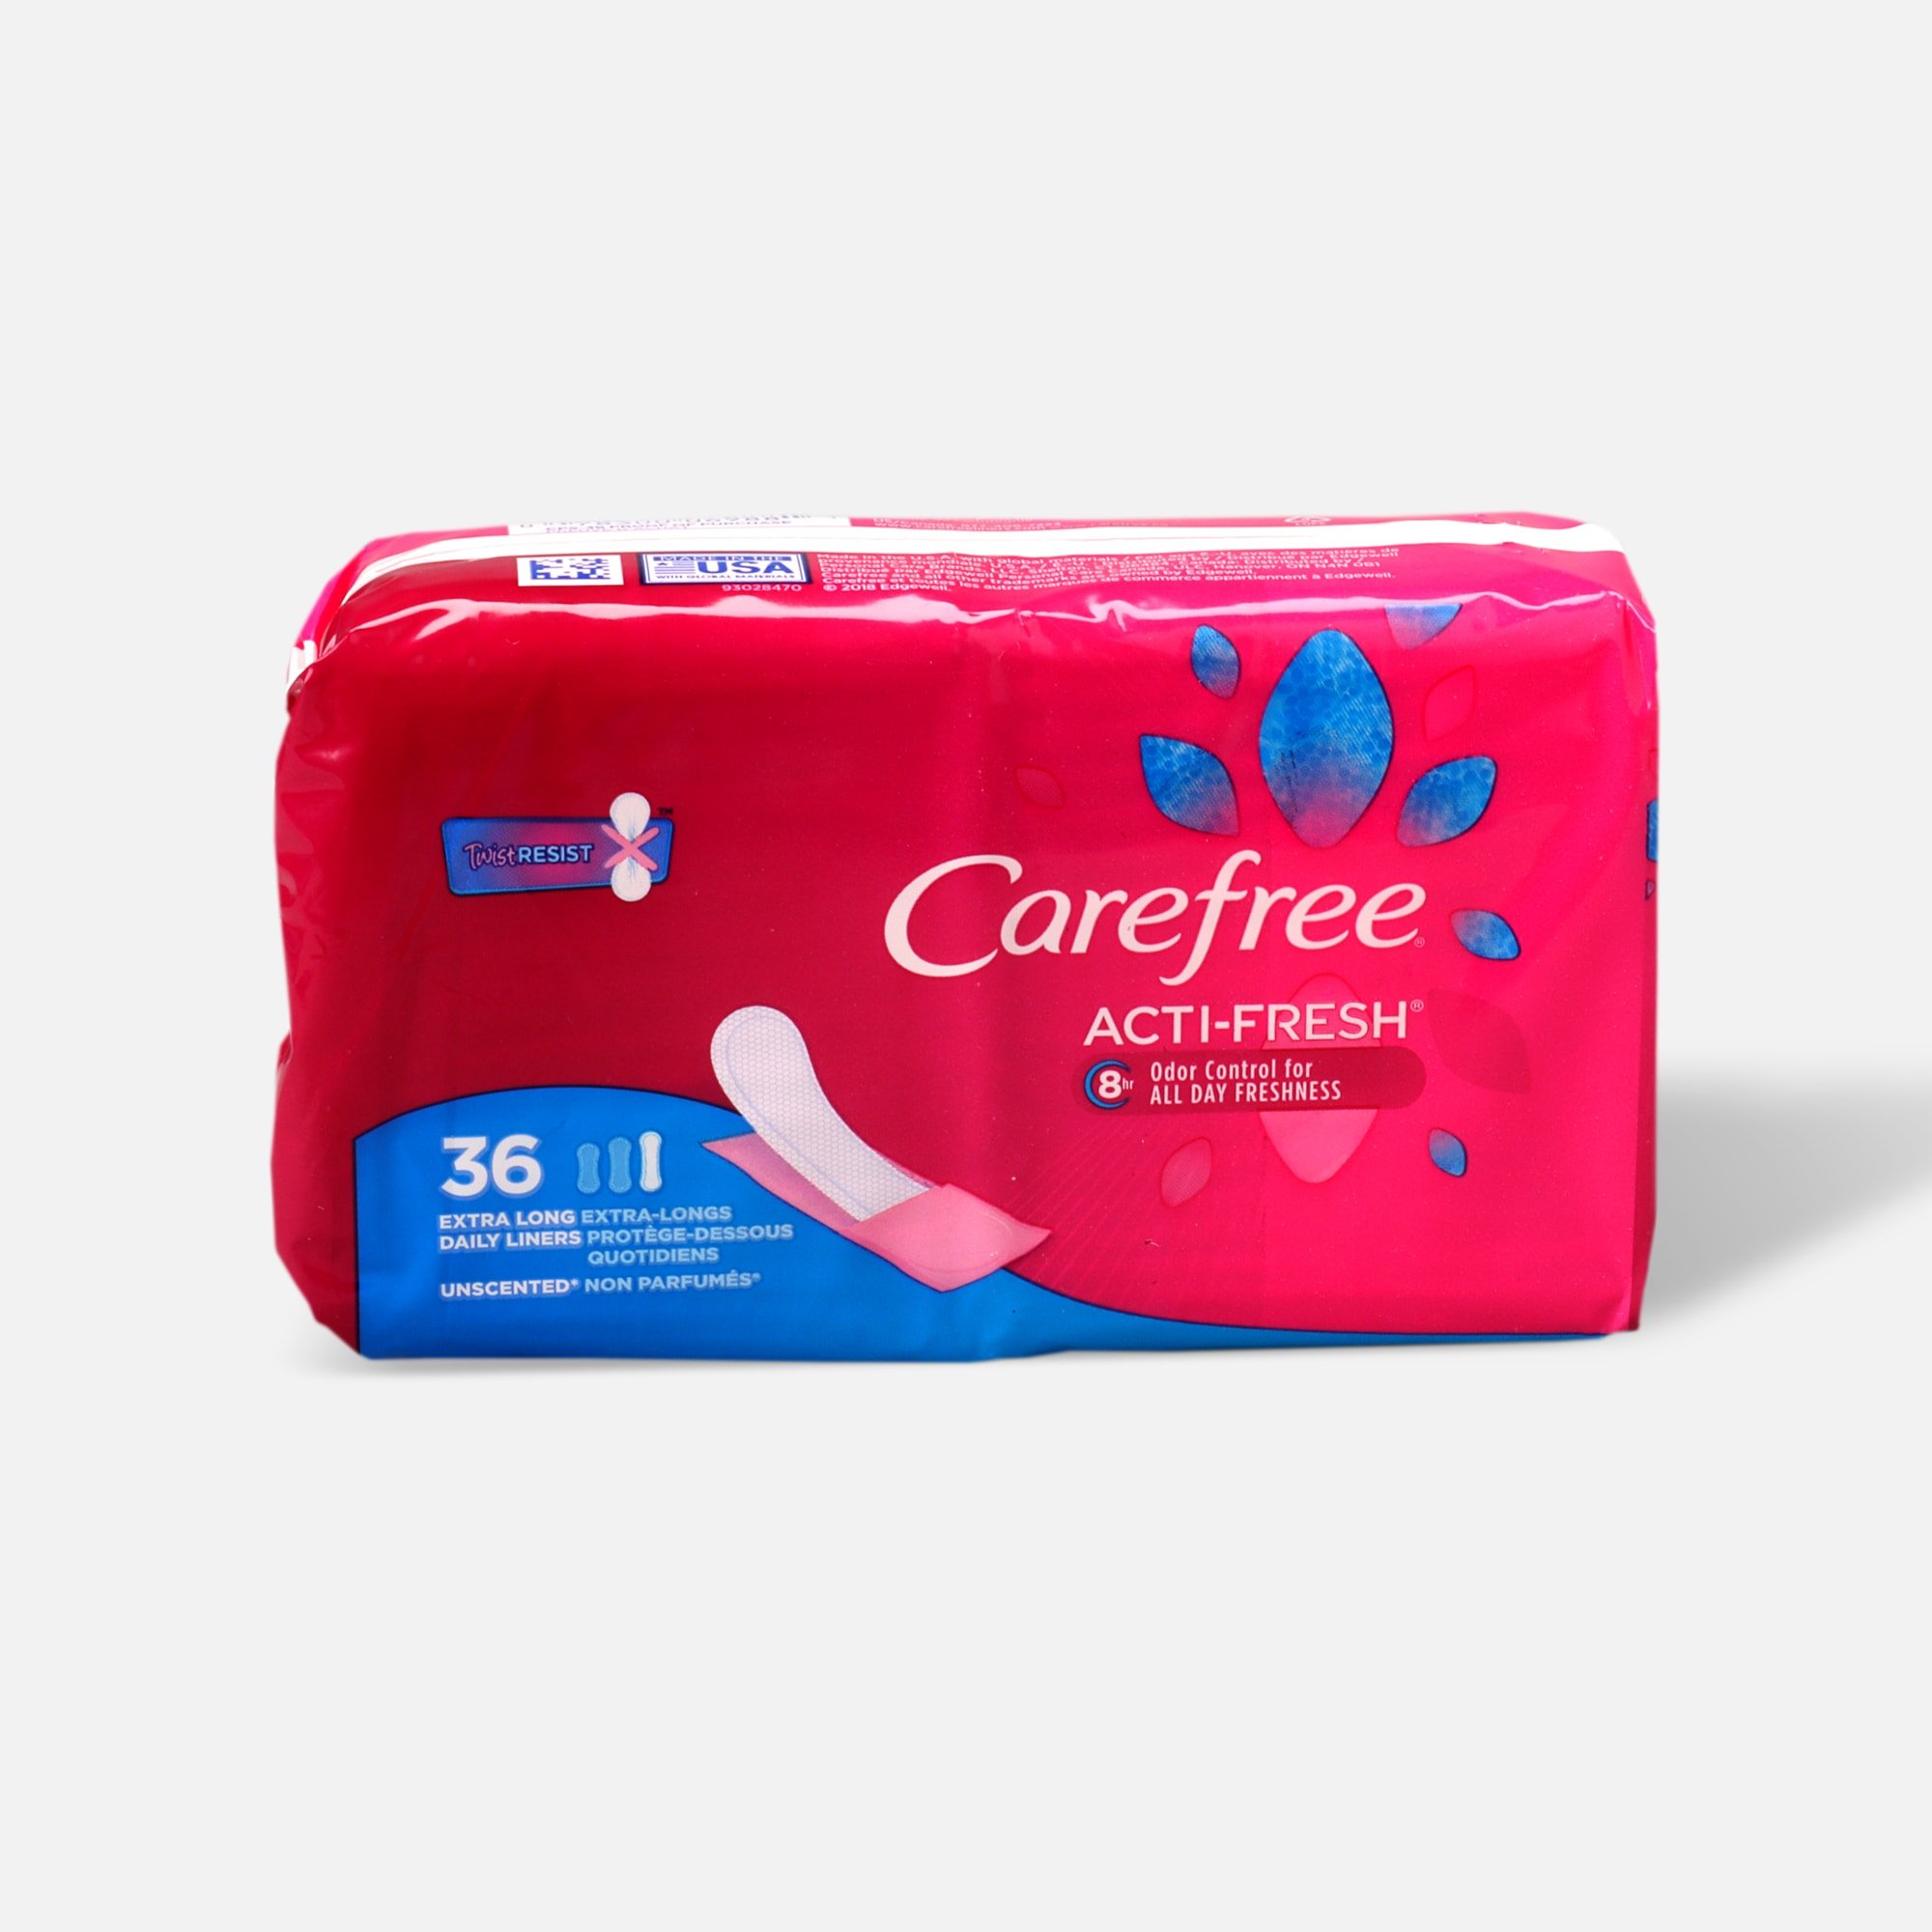 HSA Eligible | Carefree Acti-Fresh Extra Long Pantiliners, Unscented, 36ct